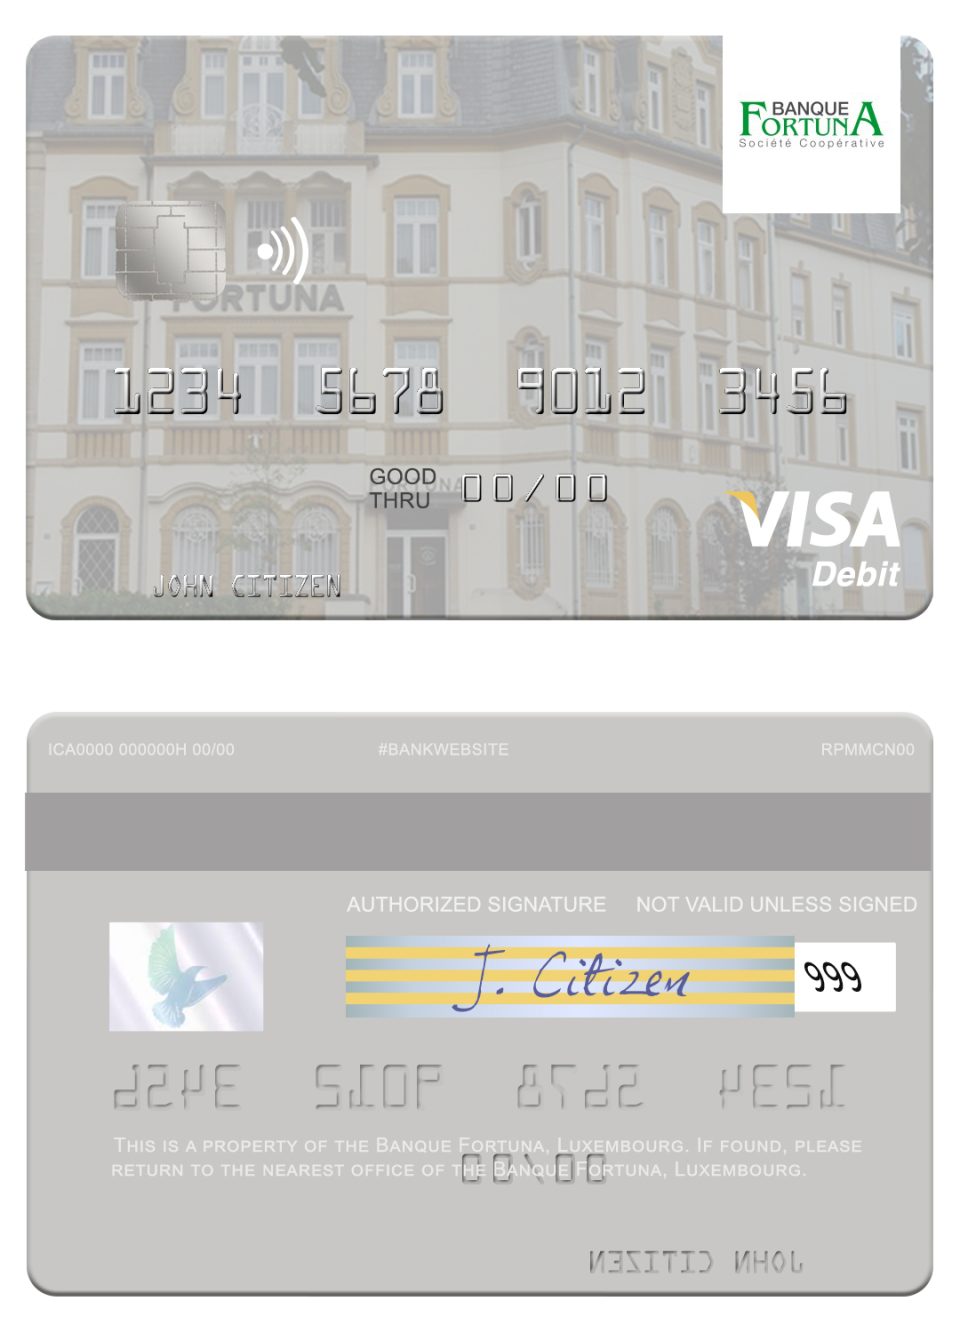 Fillable Luxembourg Banque Fortuna visa credit card Templates